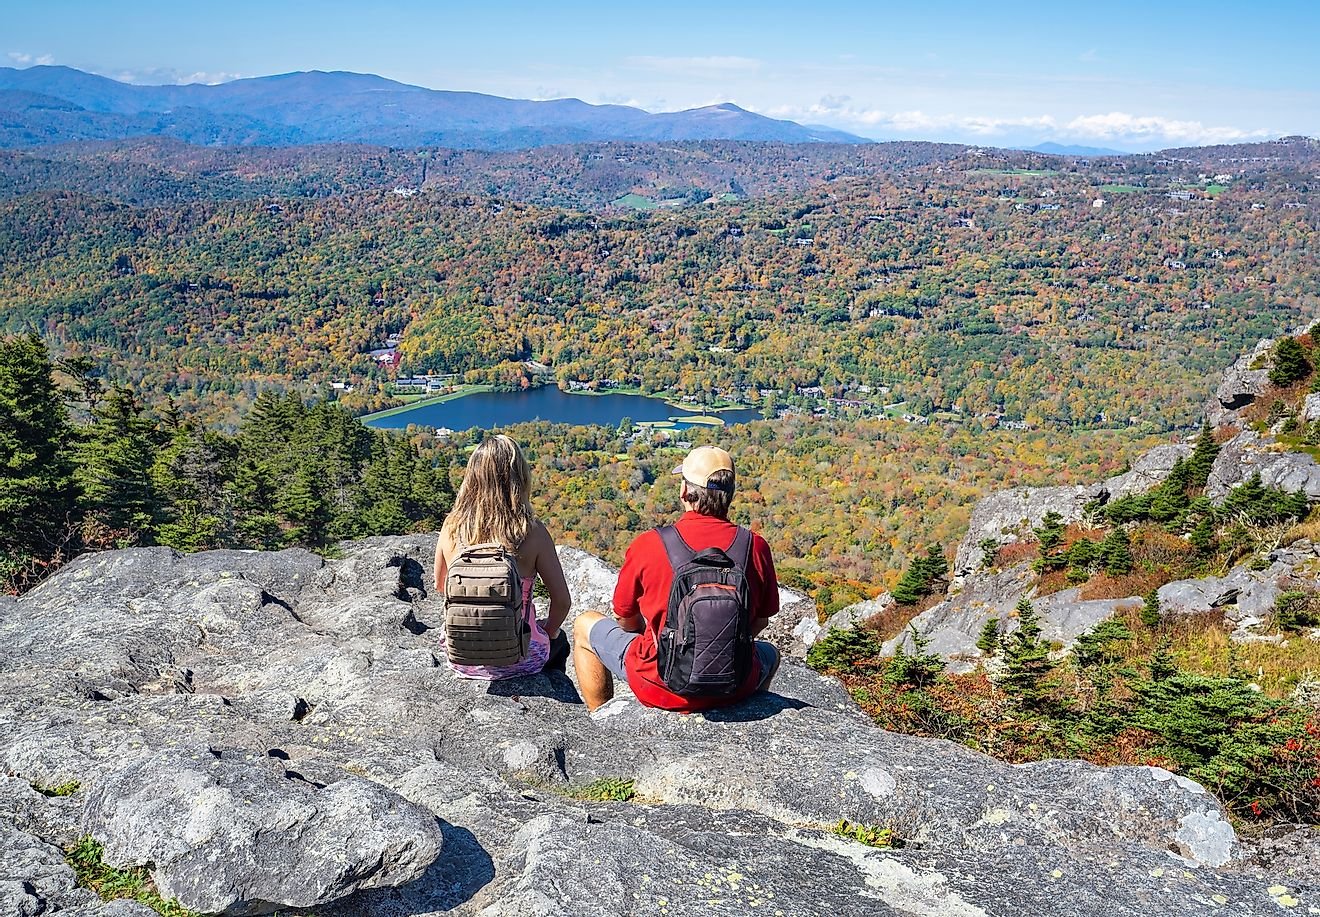 The 15 Best North Carolina Mountain Towns To Visit